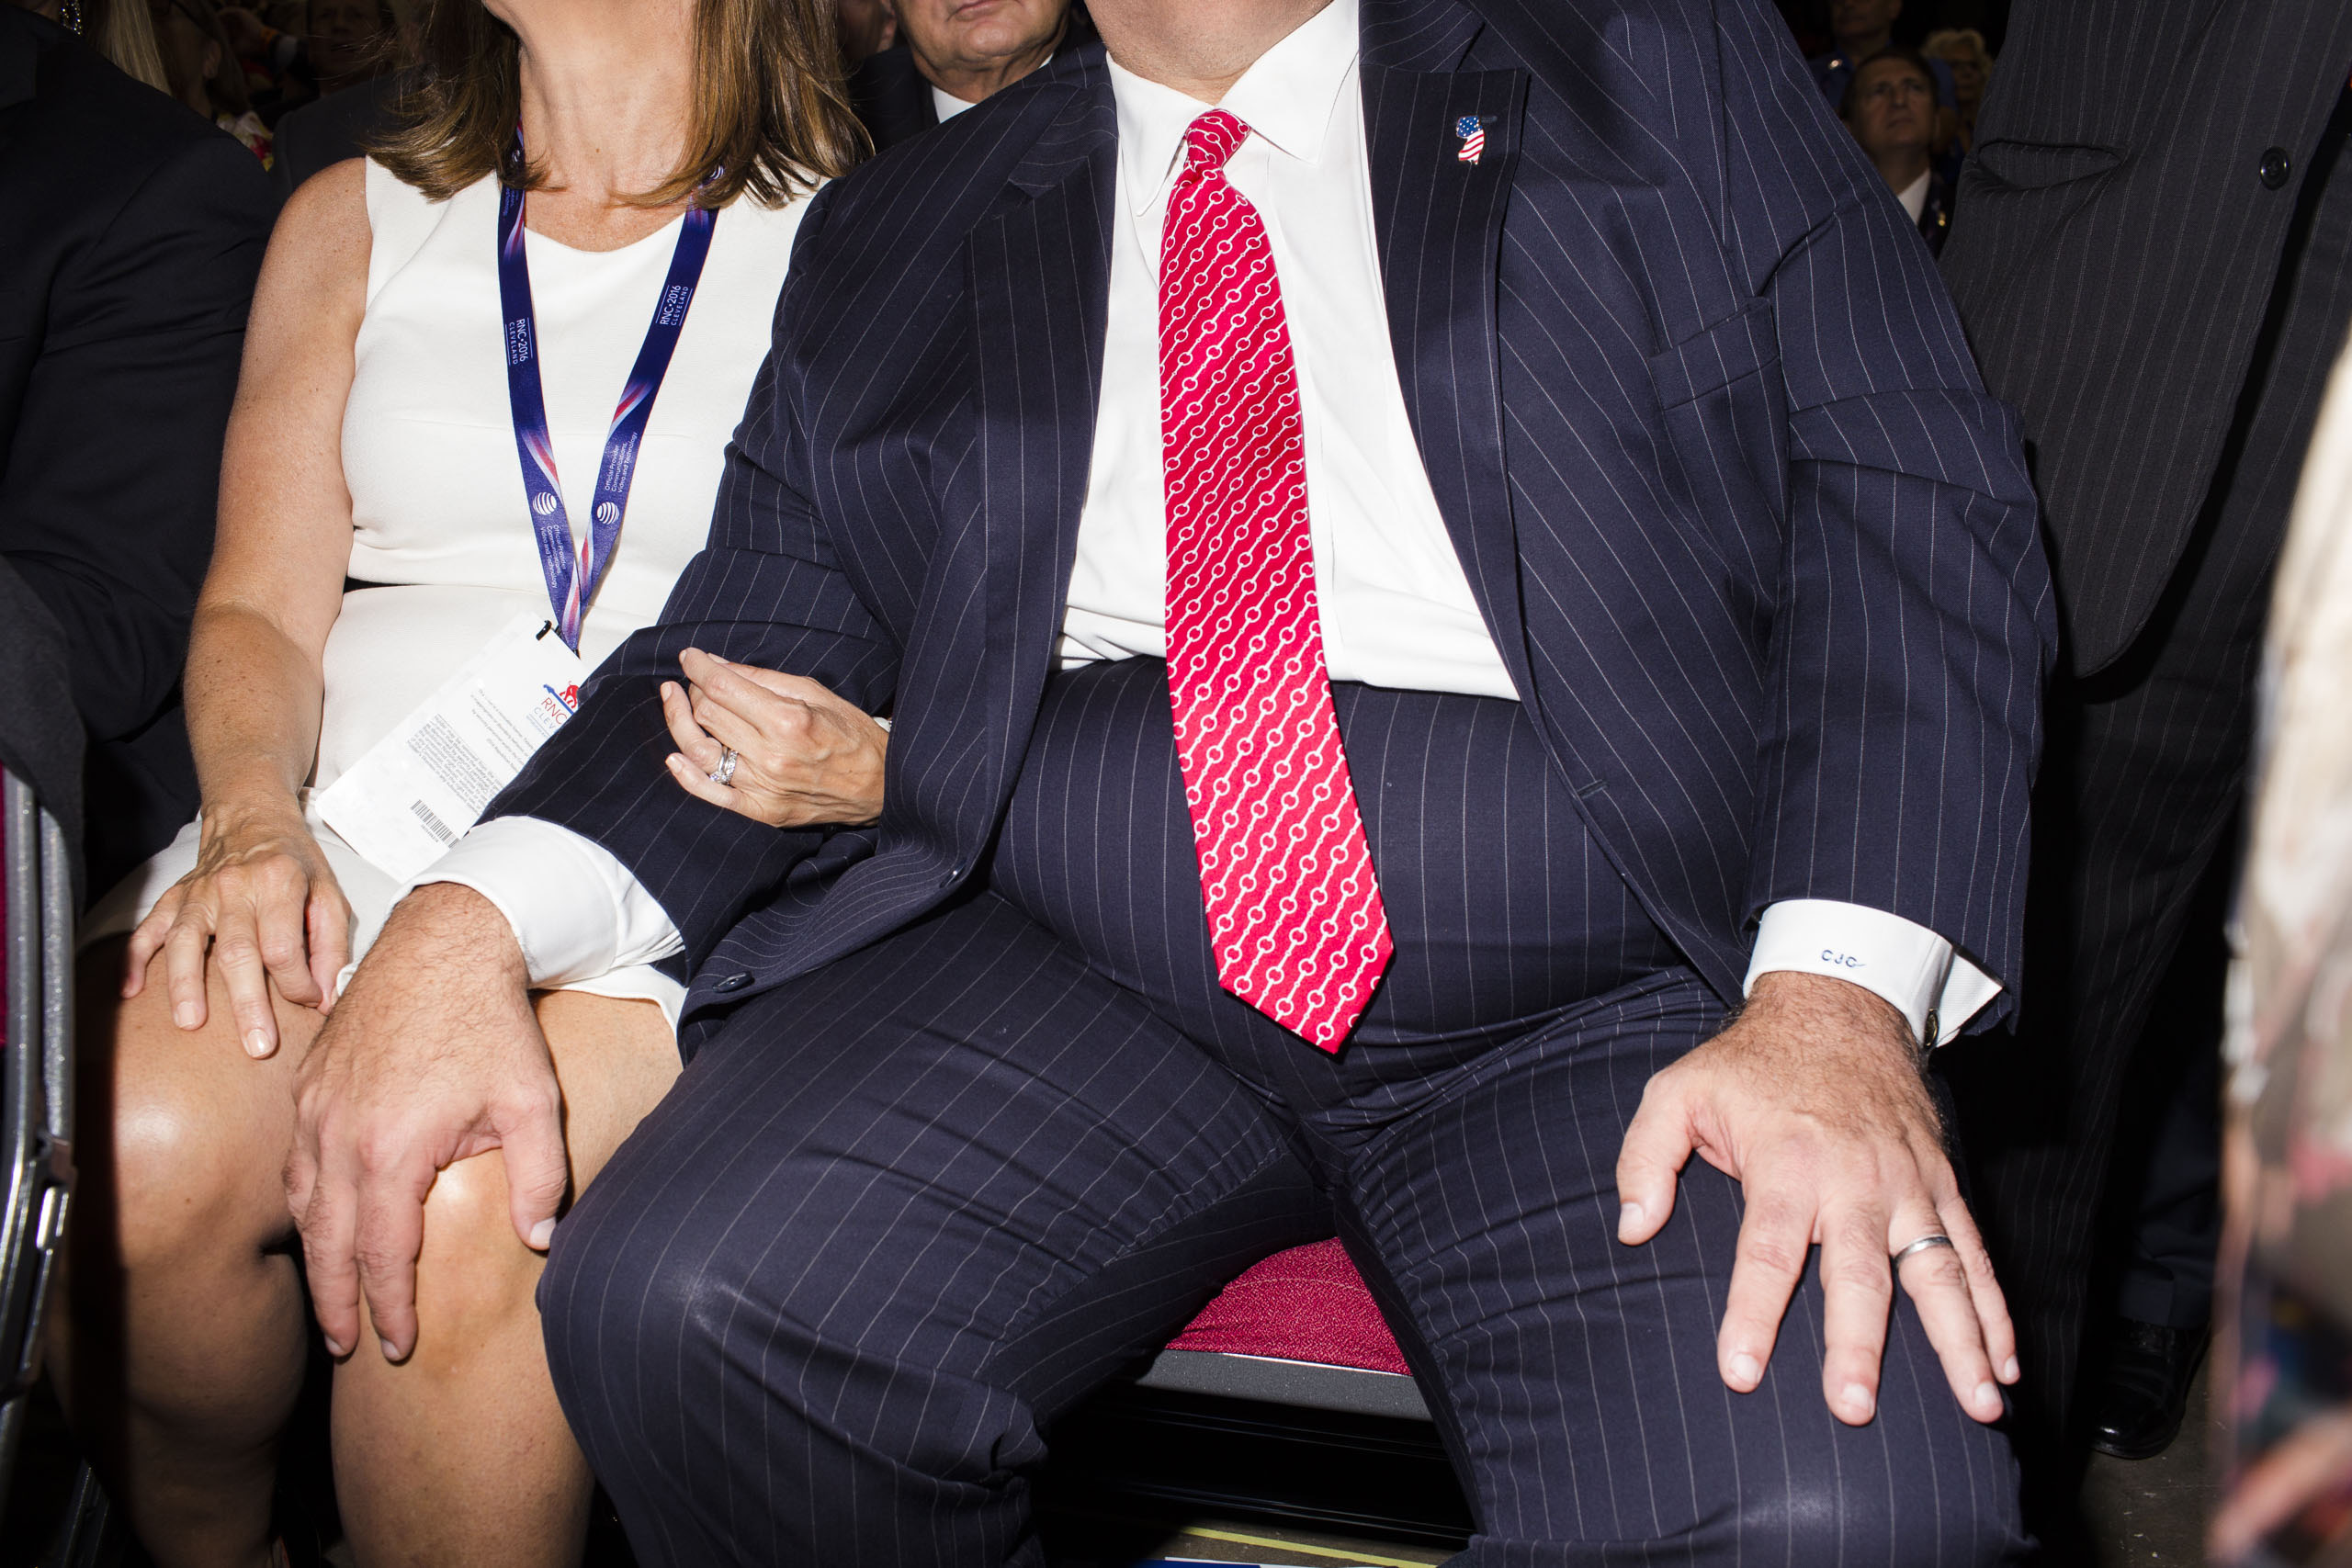 New Jersey Gov. Chris Christie and his wife Mary Pat Christie seated at the 2016 Republican National Convention in Cleveland, on July 19, 2016.